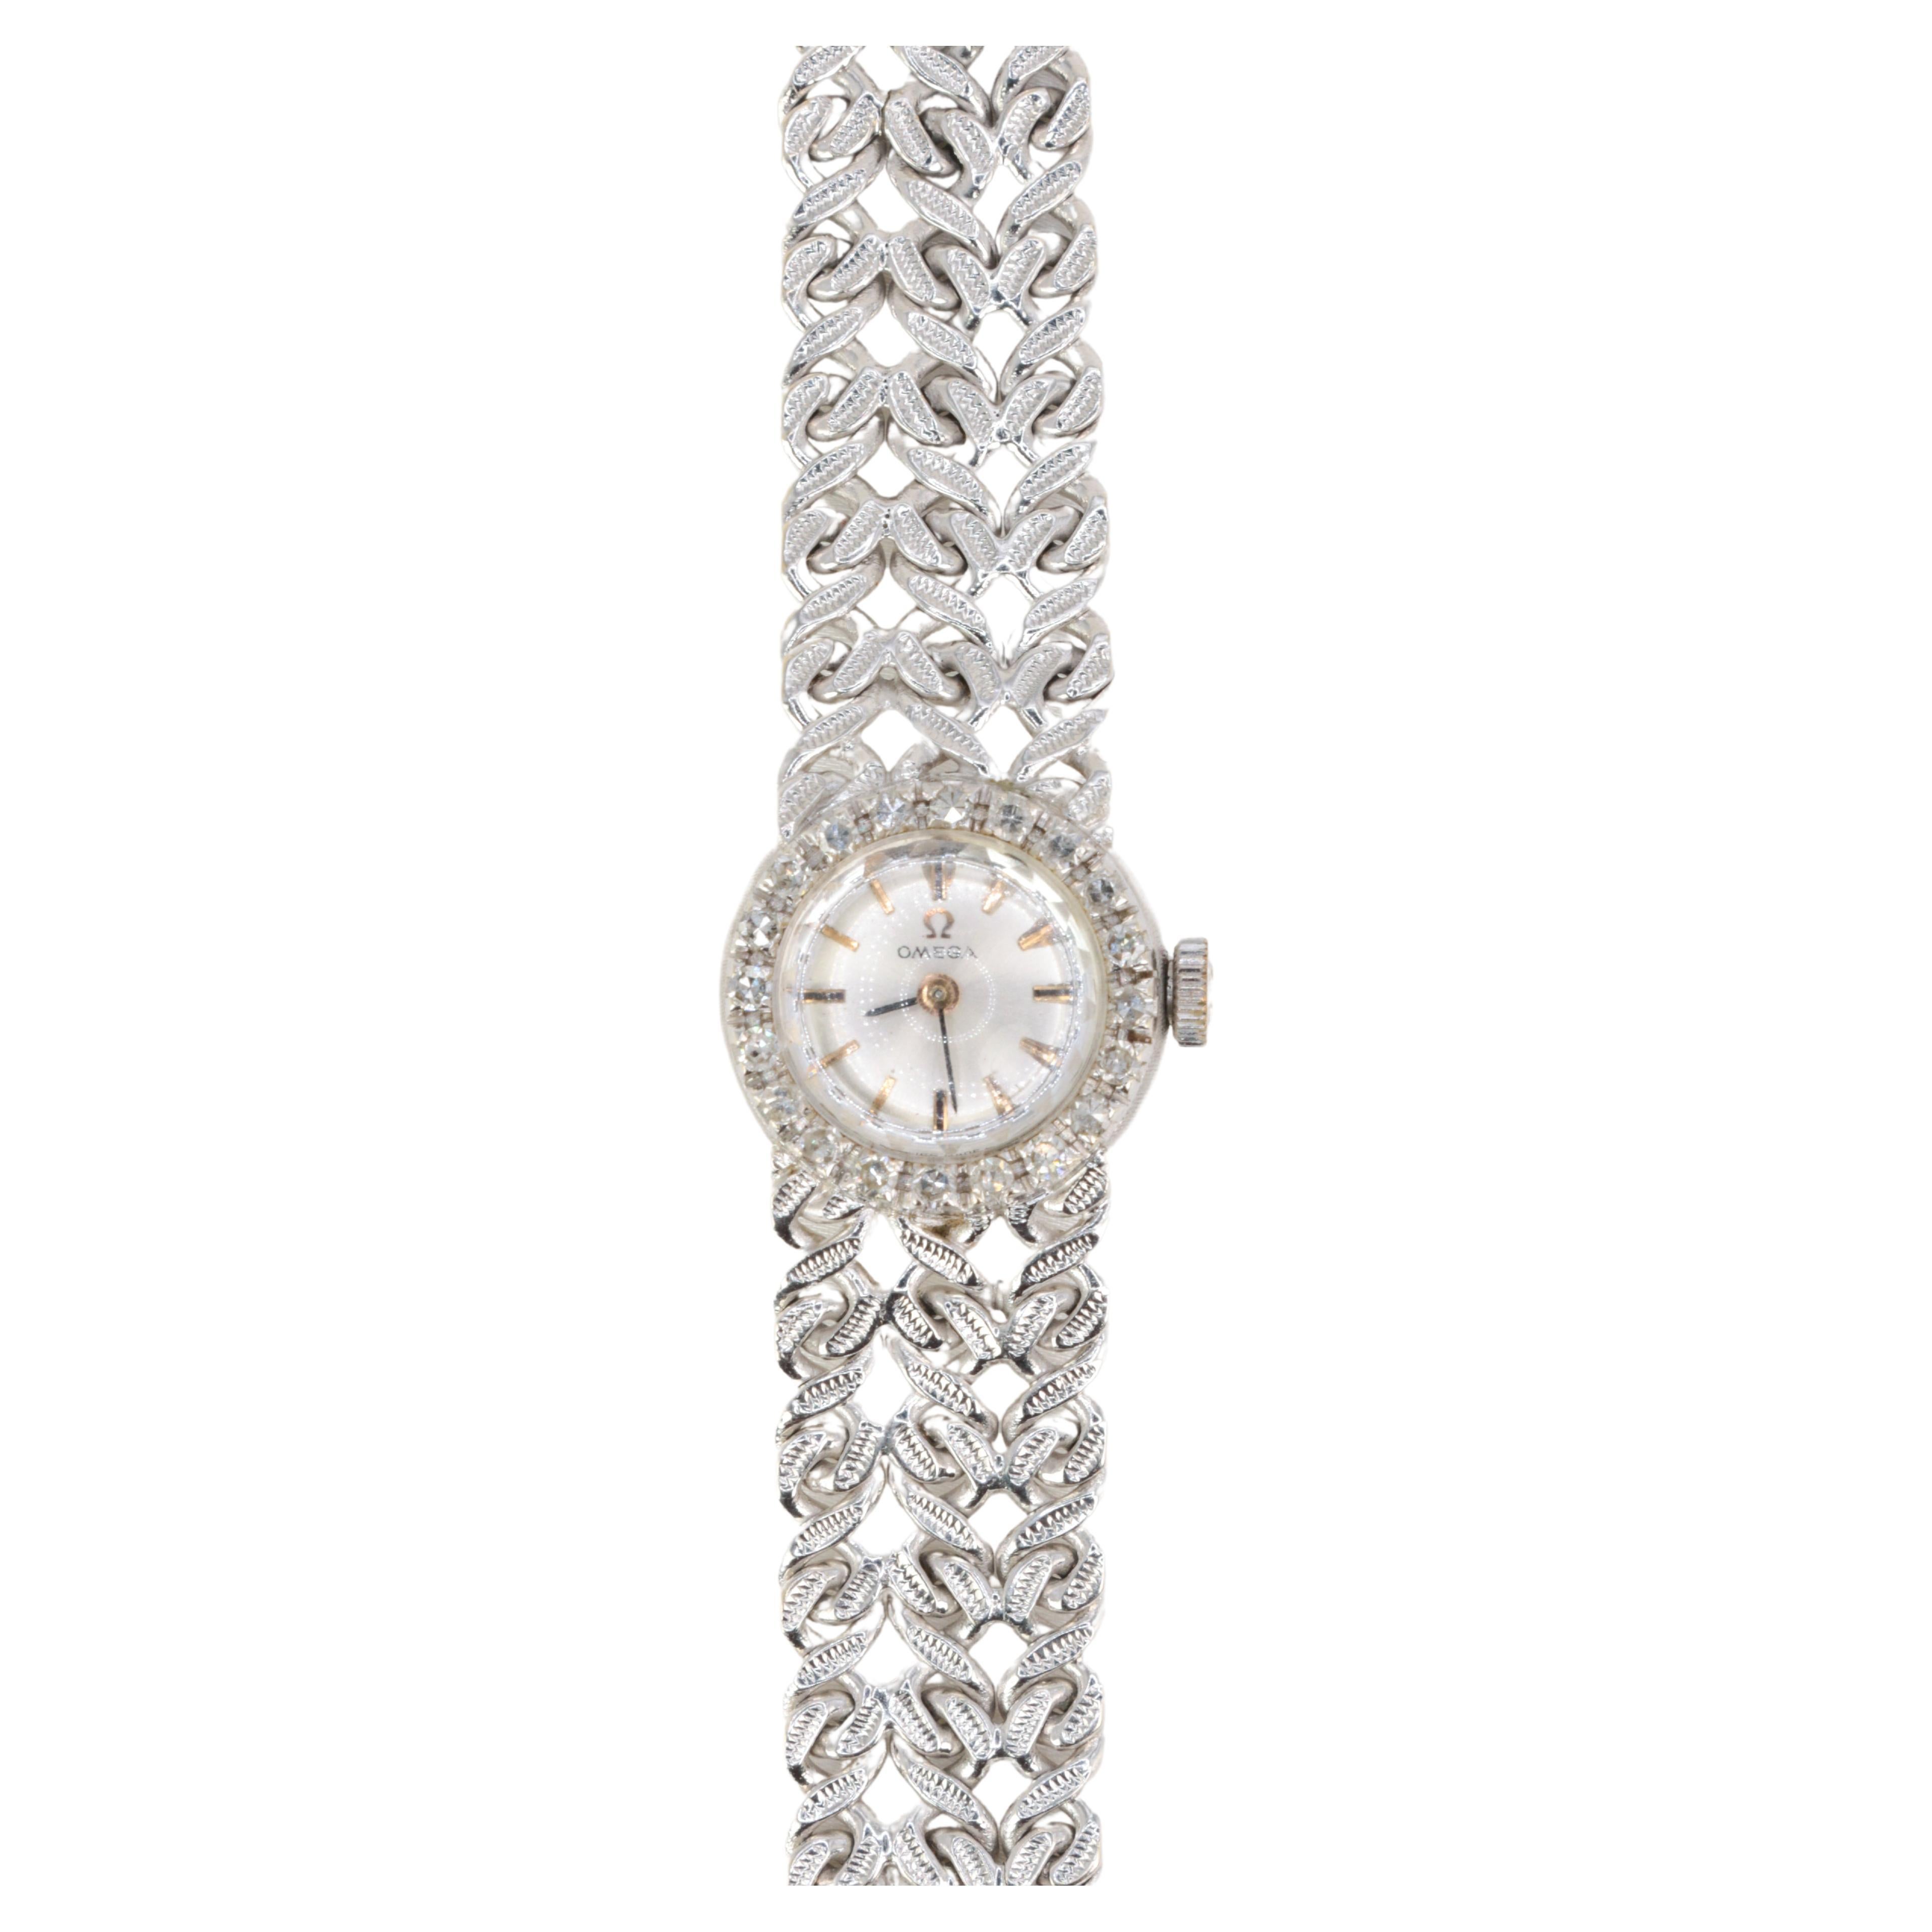 Omega Ladies' Watch in 18k White Gold and Diamonds